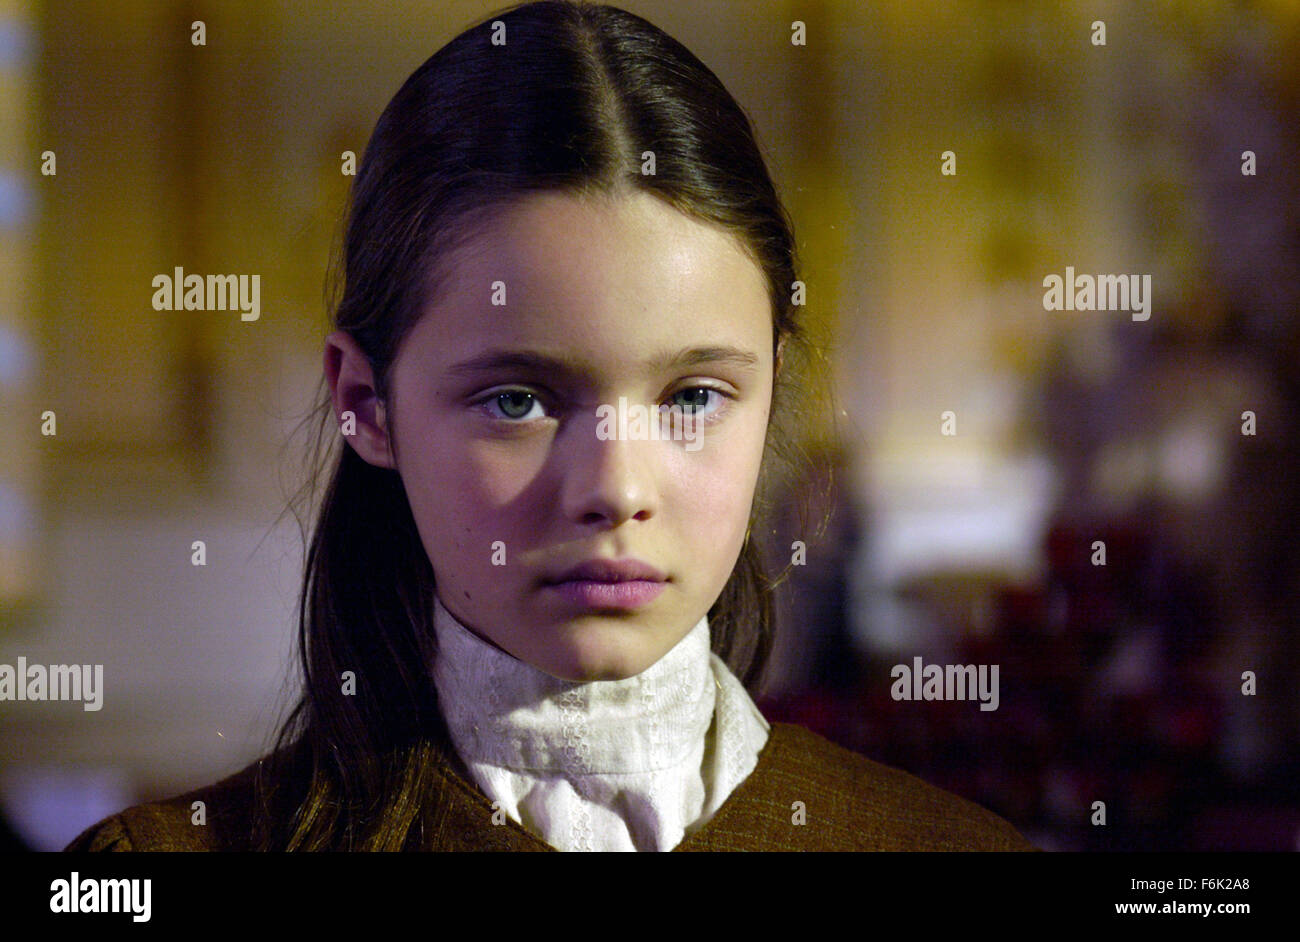 RELEASE DATE: 2005. MOVIE TITLE: Aurore. STUDIO: CinŽmaginaire Inc. PLOT: After the sudden death of her mother, Aurore Gagnon is abused by her disturbed step-mother as her town remains in the silence followed by her death. Based on a true story. PICTURED: MARIANNE FORTIER as Aurore Gagnon. Stock Photo